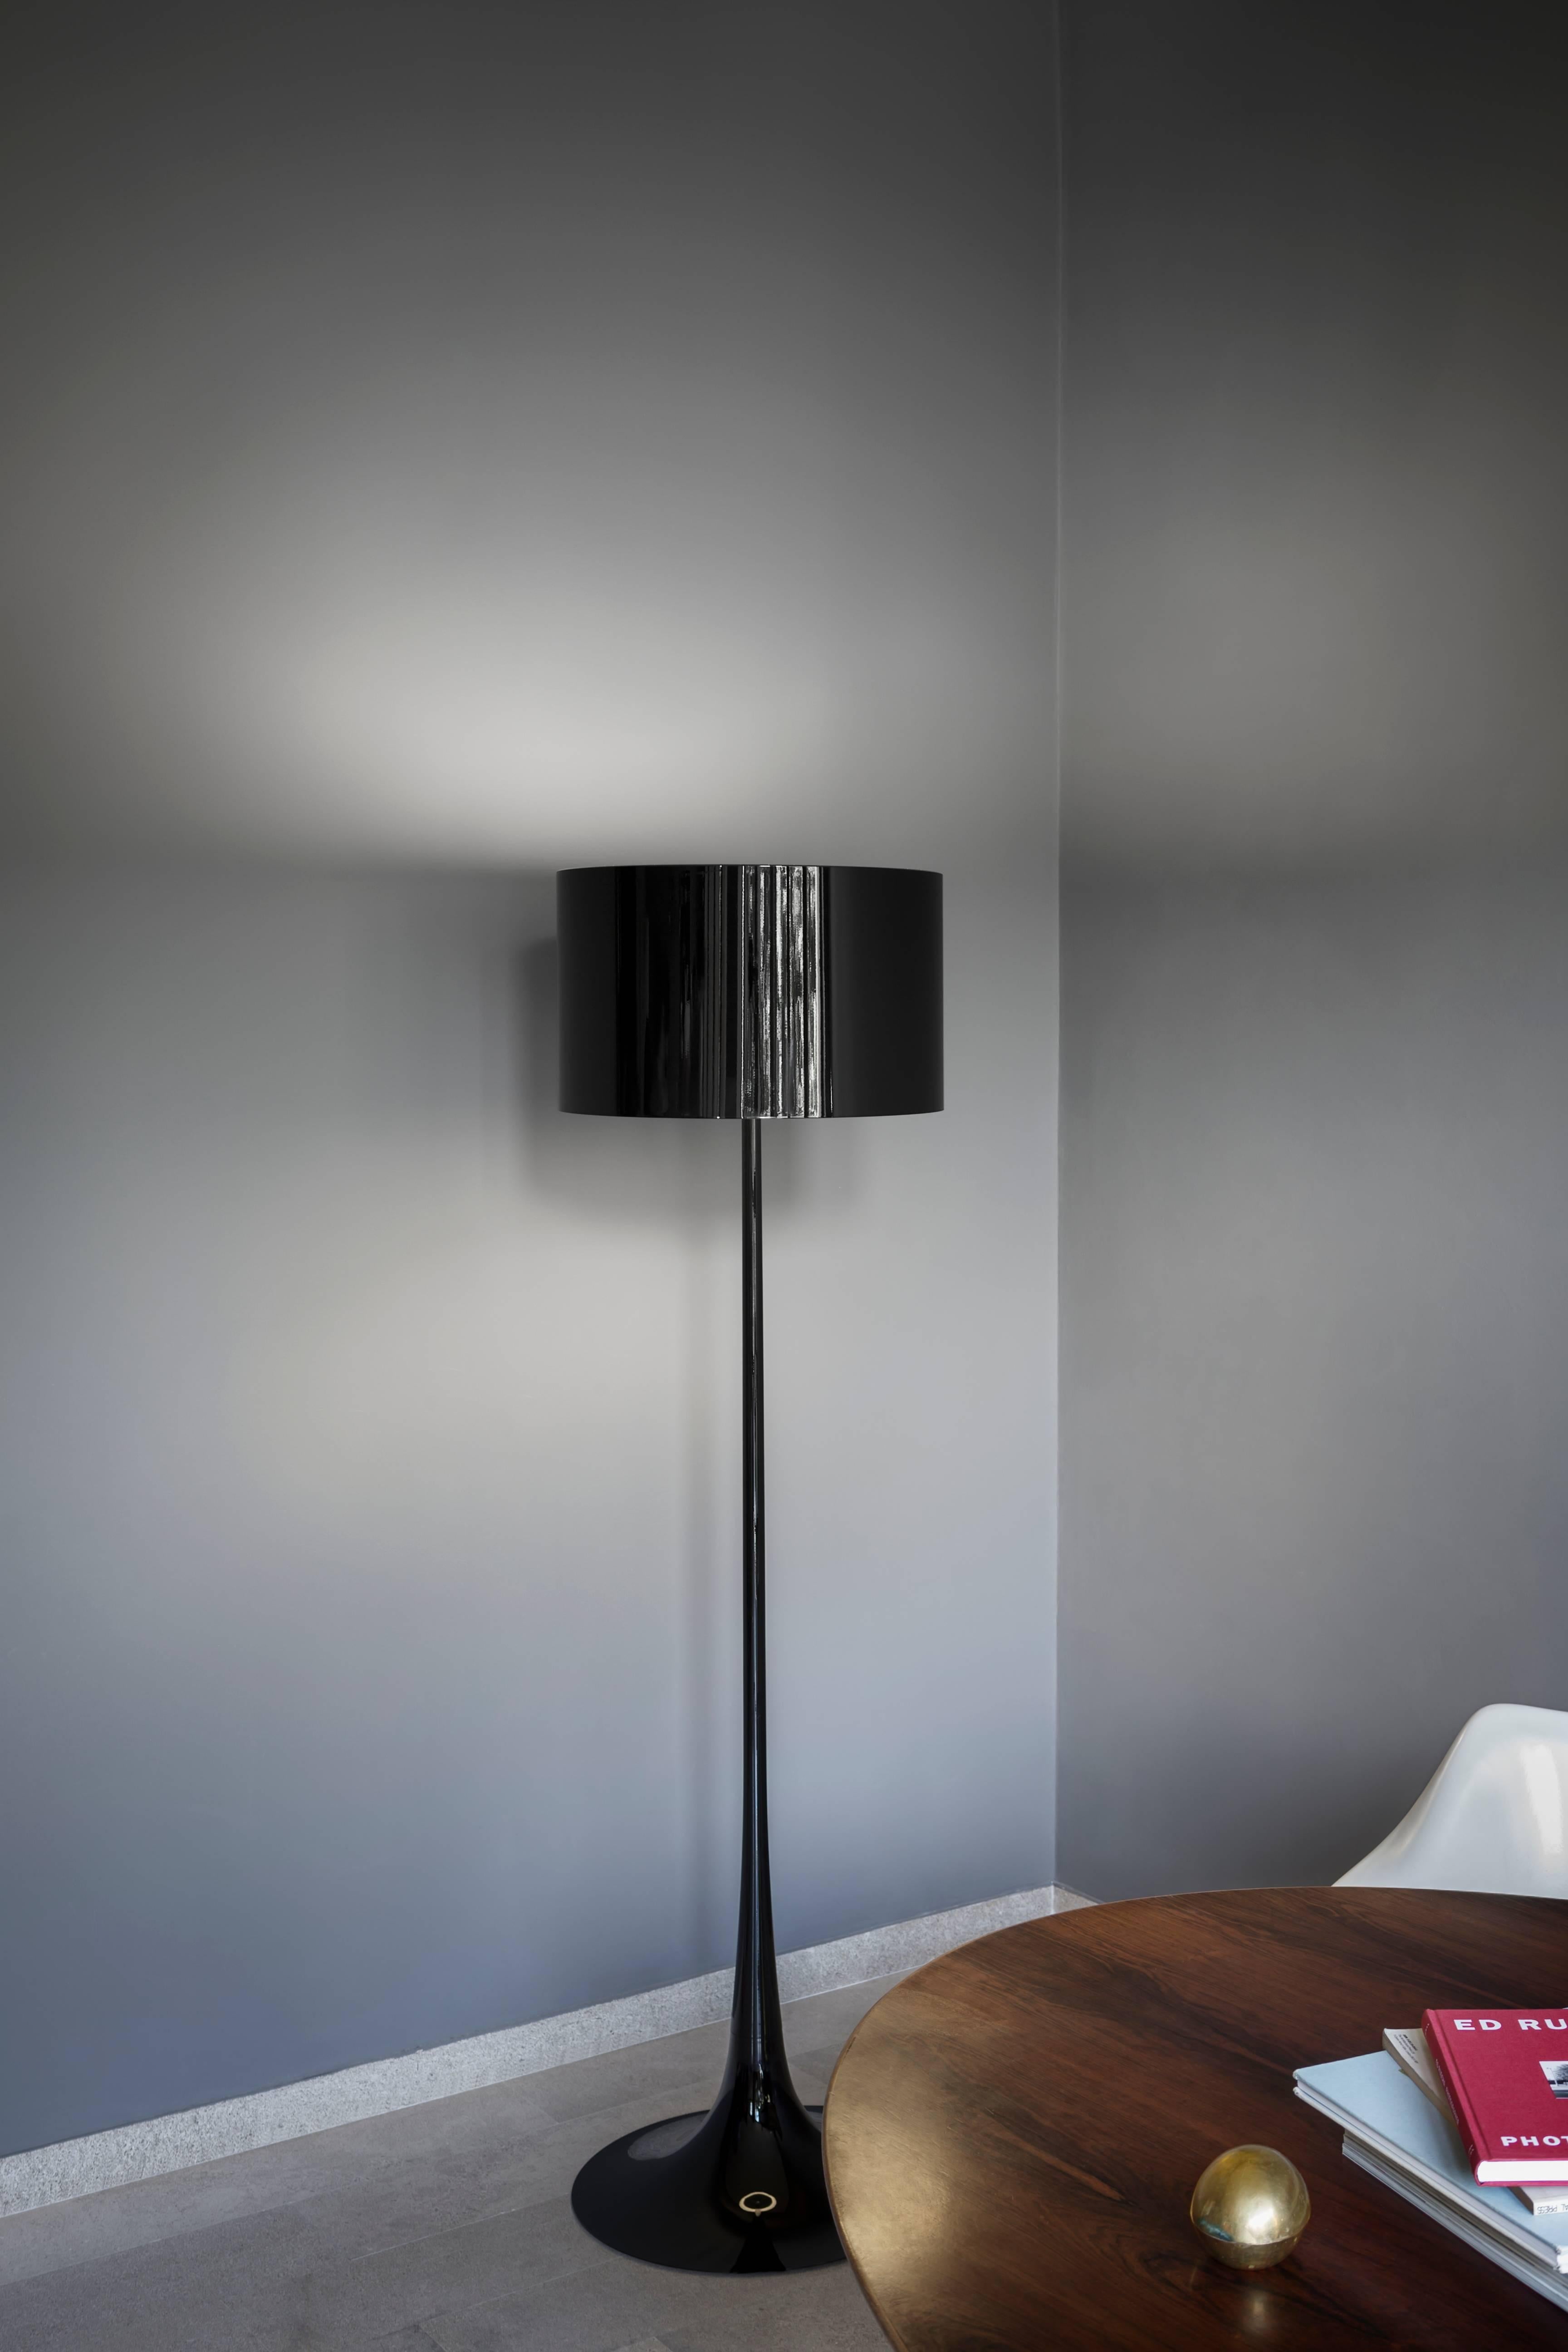 Designed by Sebastian Wrong in 2003, the Spun Light-F floor lamp reflects the best of modern manufacturing technology combined with elegance, craftsmanship, and dynamic fluid aesthetics.

Its main body has a spun metal frame and diffuser. The